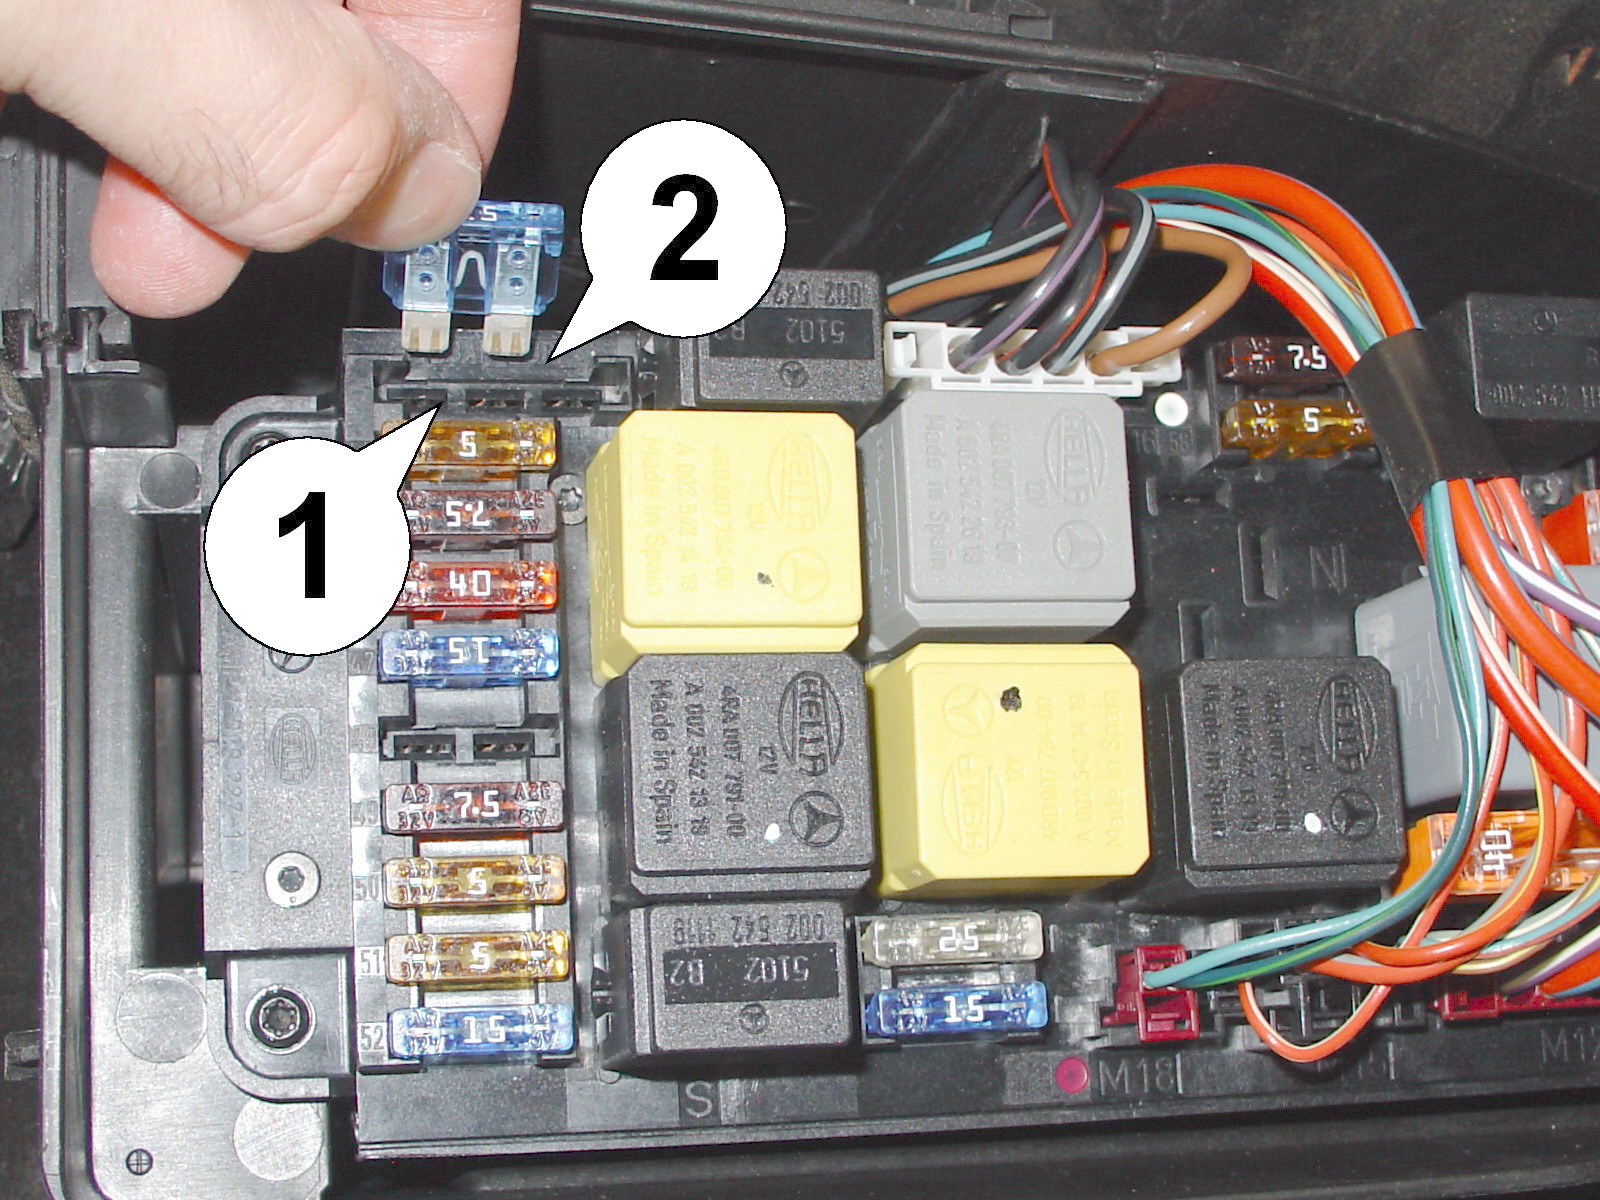 STLBMZ1 Mercedes SLK and CLK how to enable driving HORN chirps mazda 6 2008 fuse box 